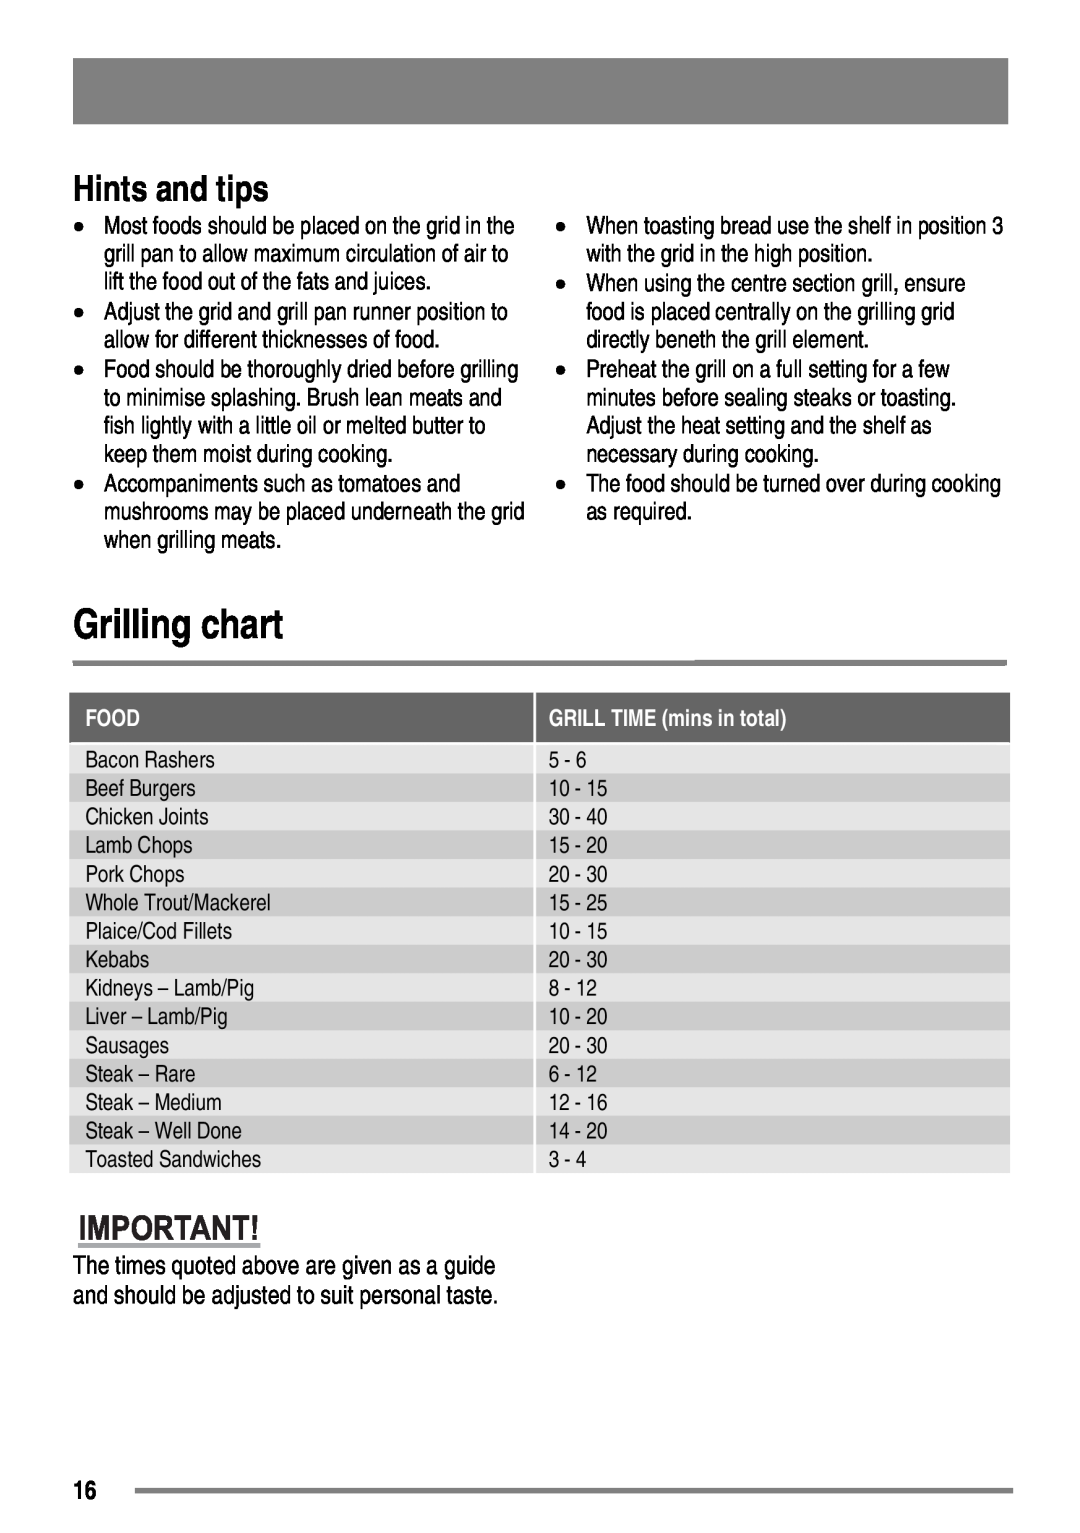 Zanussi ZKC6020 user manual Grilling chart, Hints and tips, Food, GRILL TIME mins in total 